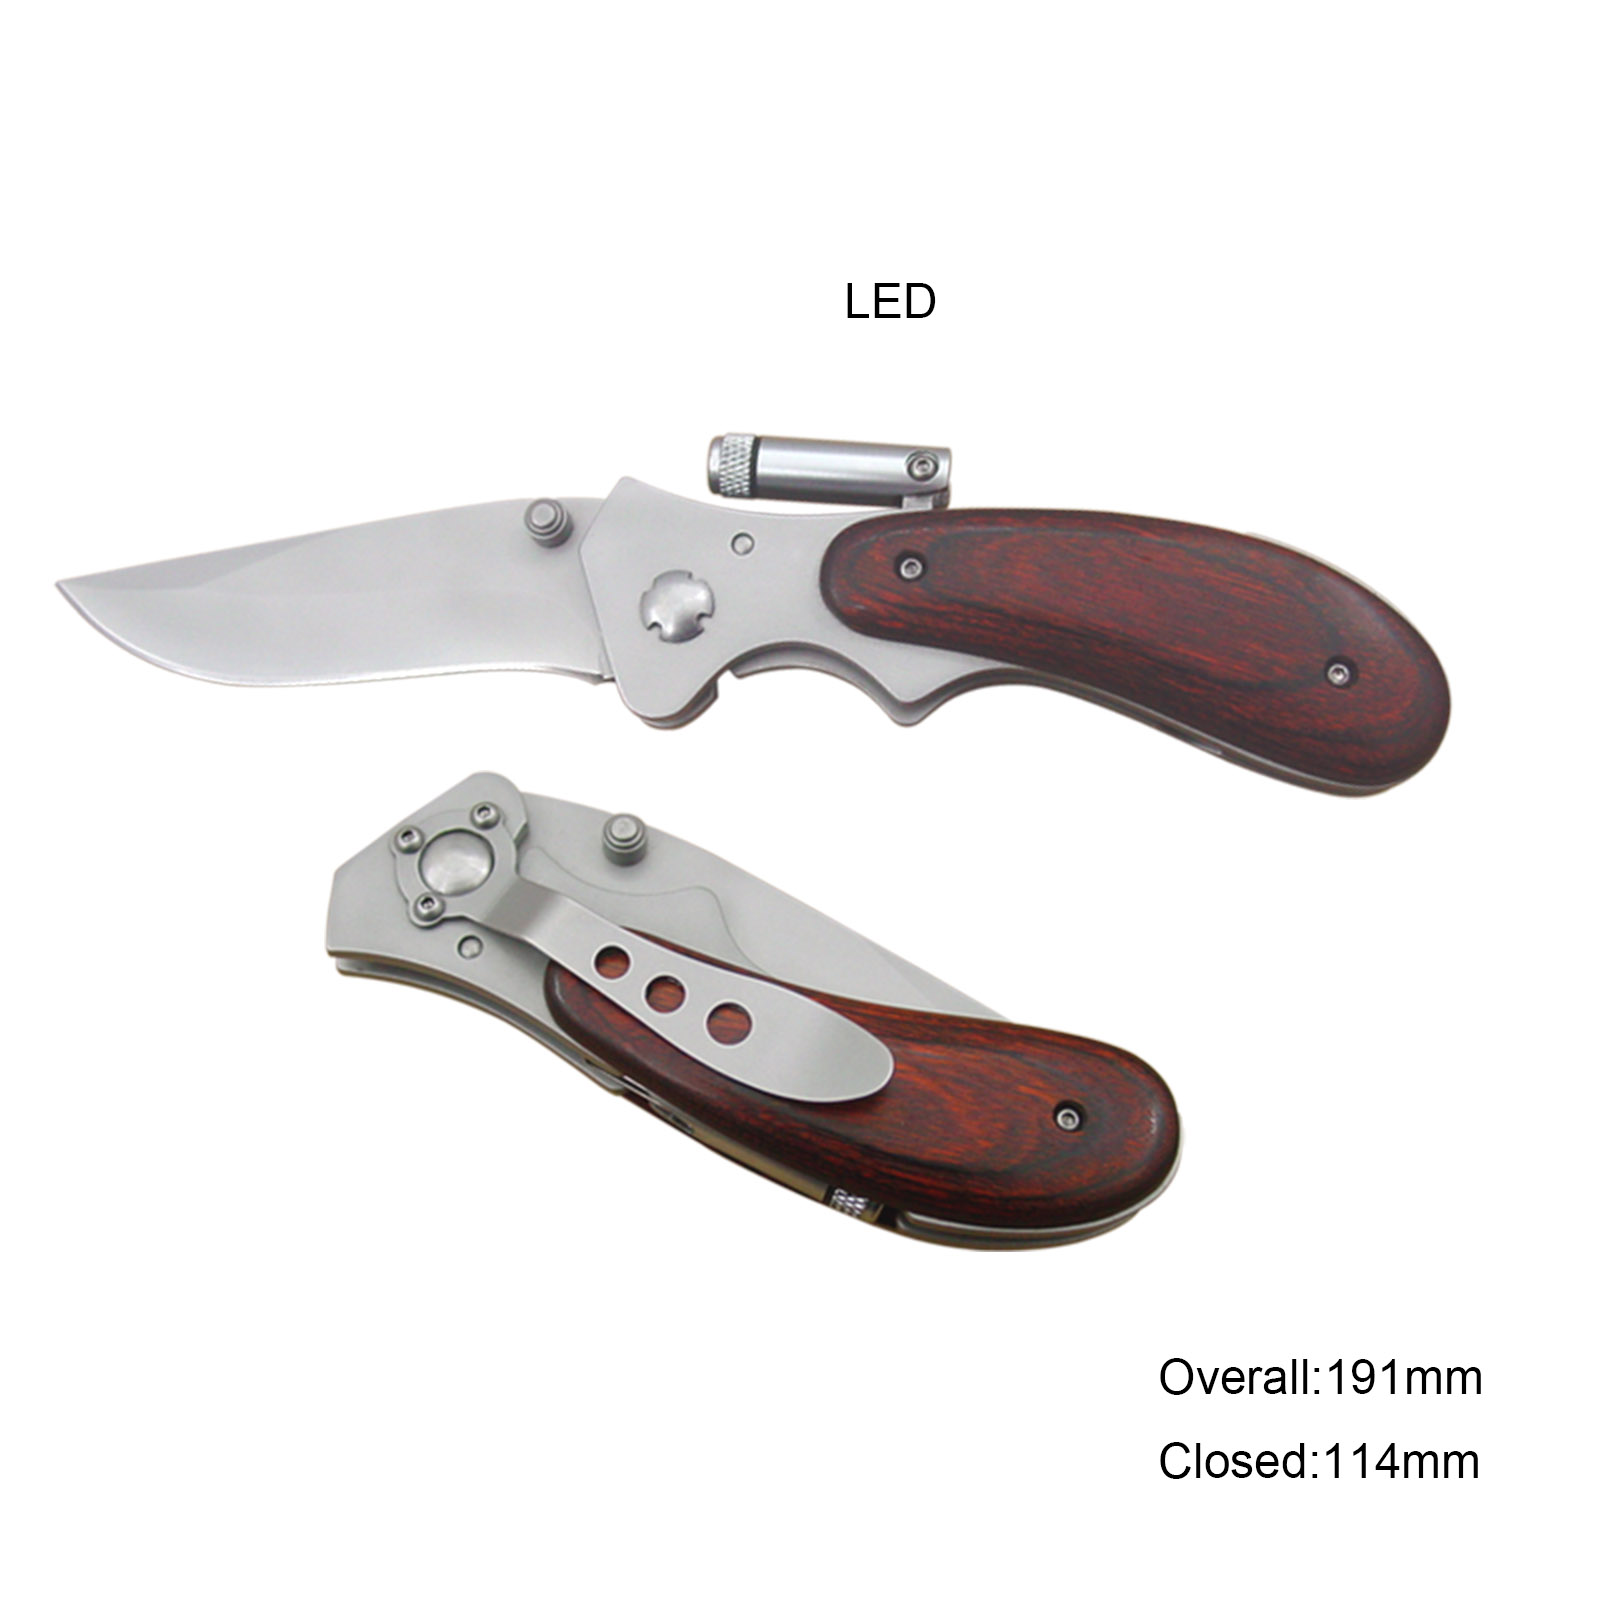 #359 Wooden Handle Folding Knife with LED 